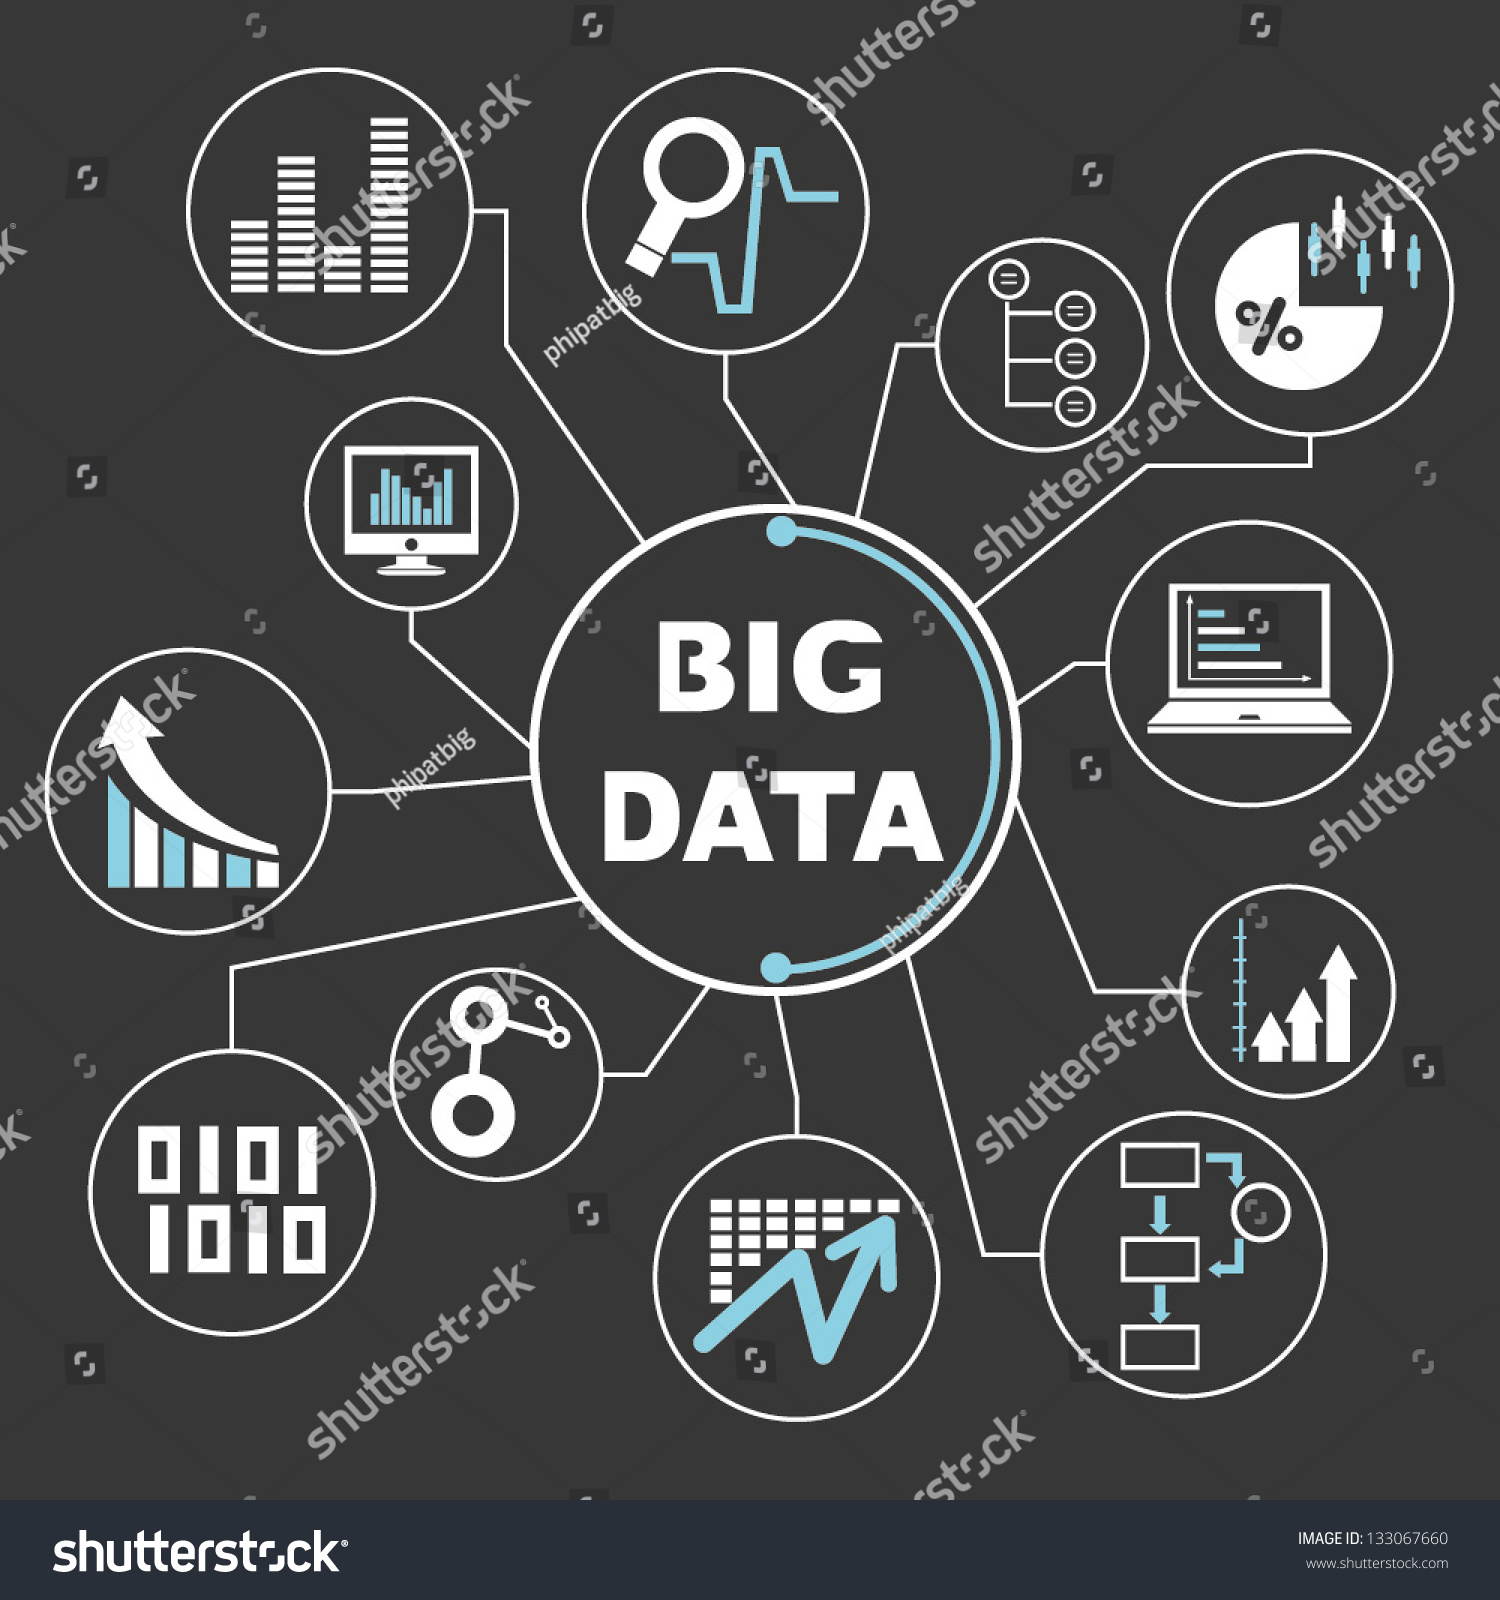 big data mind mapping, info graphics #133067660